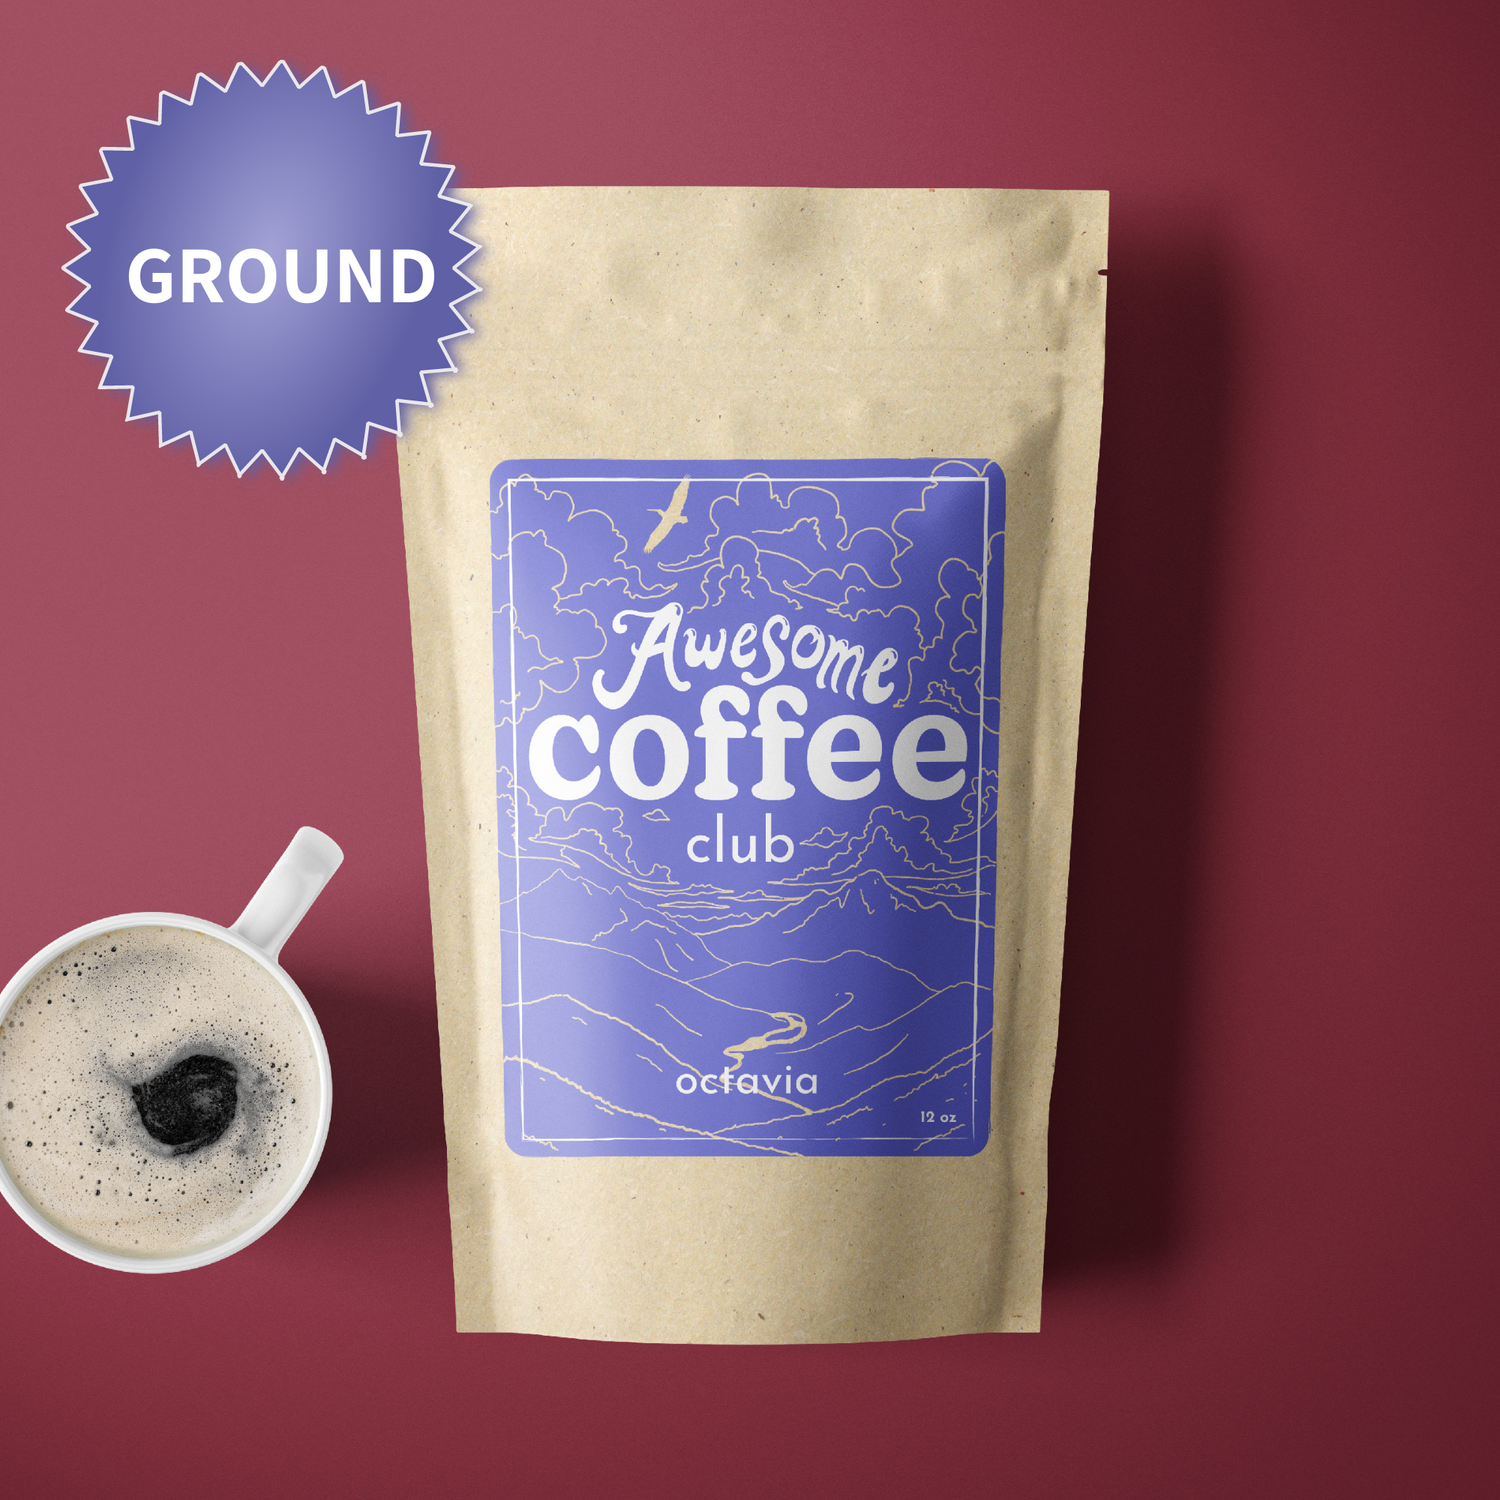 A photo of a brown bag of coffee with a light purple label that shows a mountain scene and has the text "Awesome Coffee Club; Octavia". The bag sites atop a maroon background with a cup of coffee next to it. There is a purple badge in the lefthand corner that reads "Ground". 